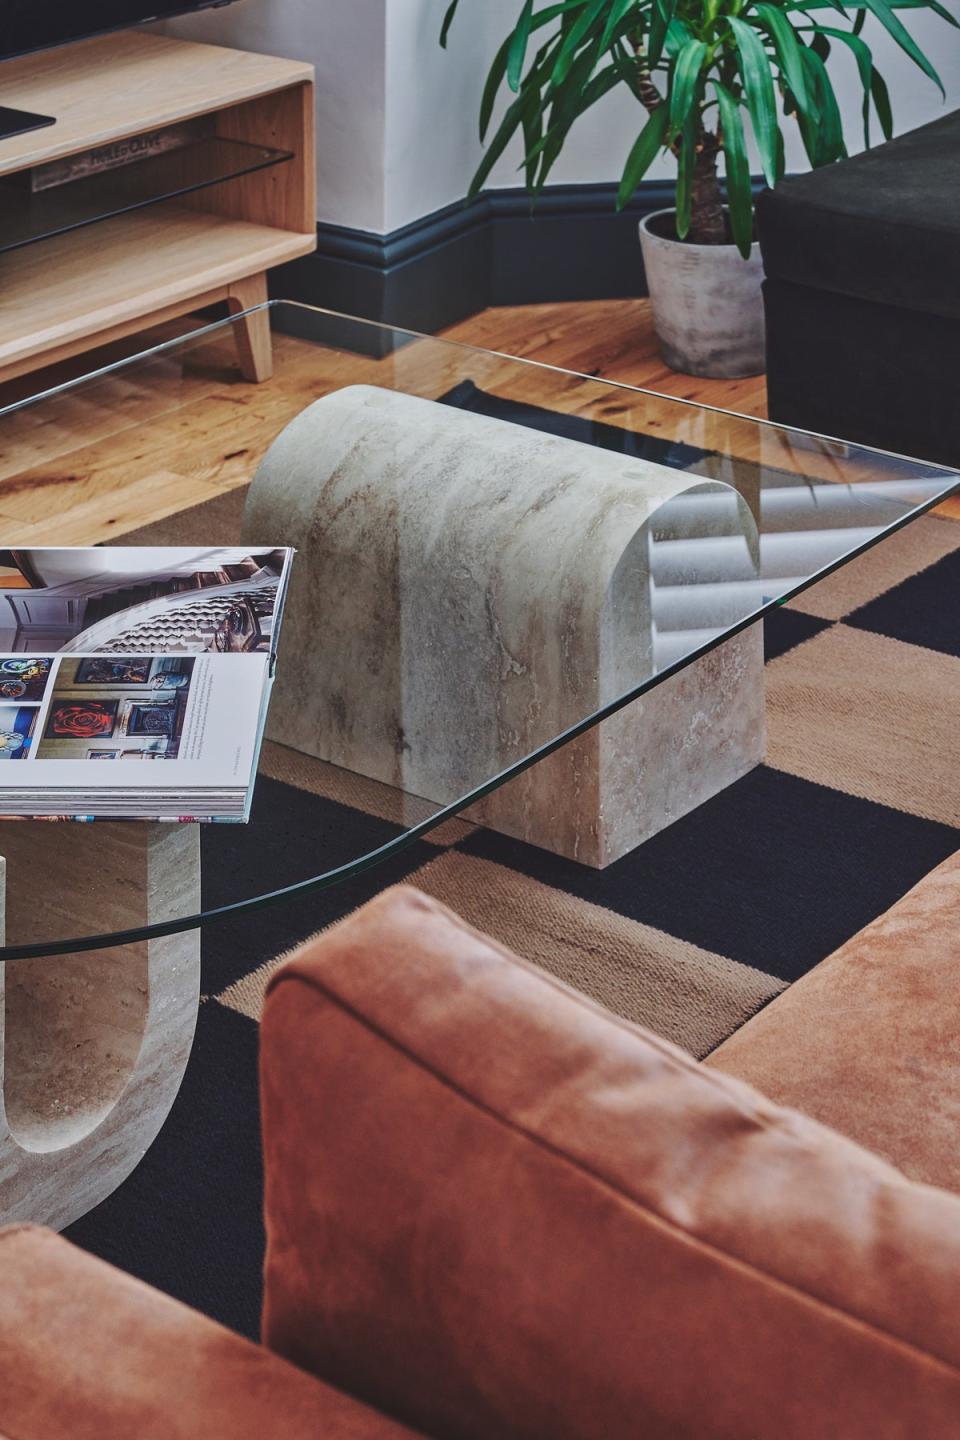 To make spaces feel larger, opt for glass furniture so you can see around and through items (Topology)